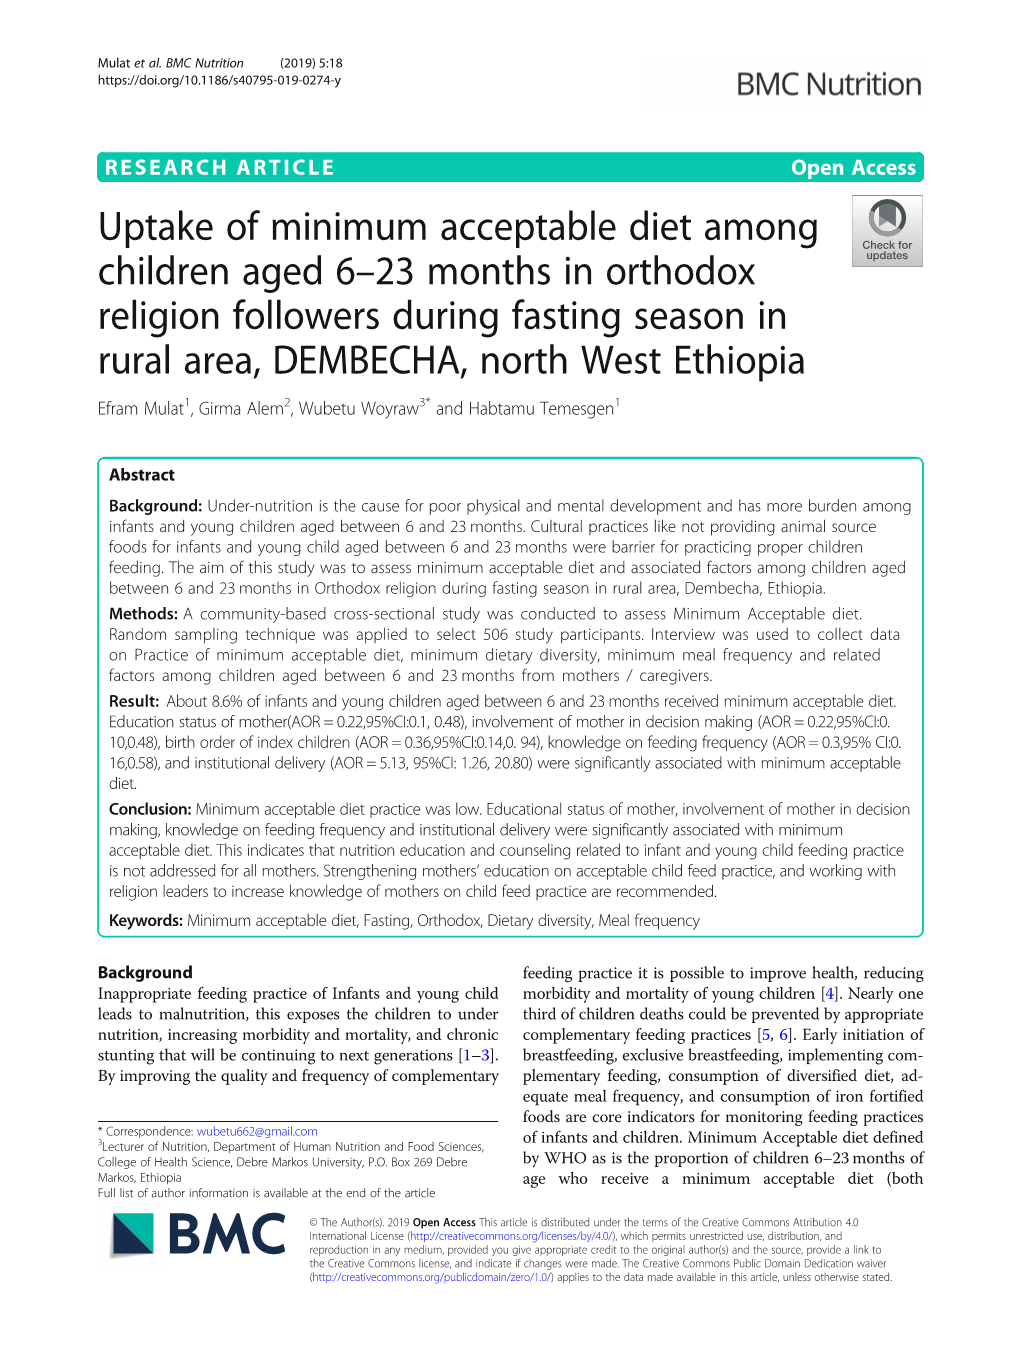 Uptake of Minimum Acceptable Diet Among Children Aged 6–23 Months in Orthodox Religion Followers During Fasting Season in Rura